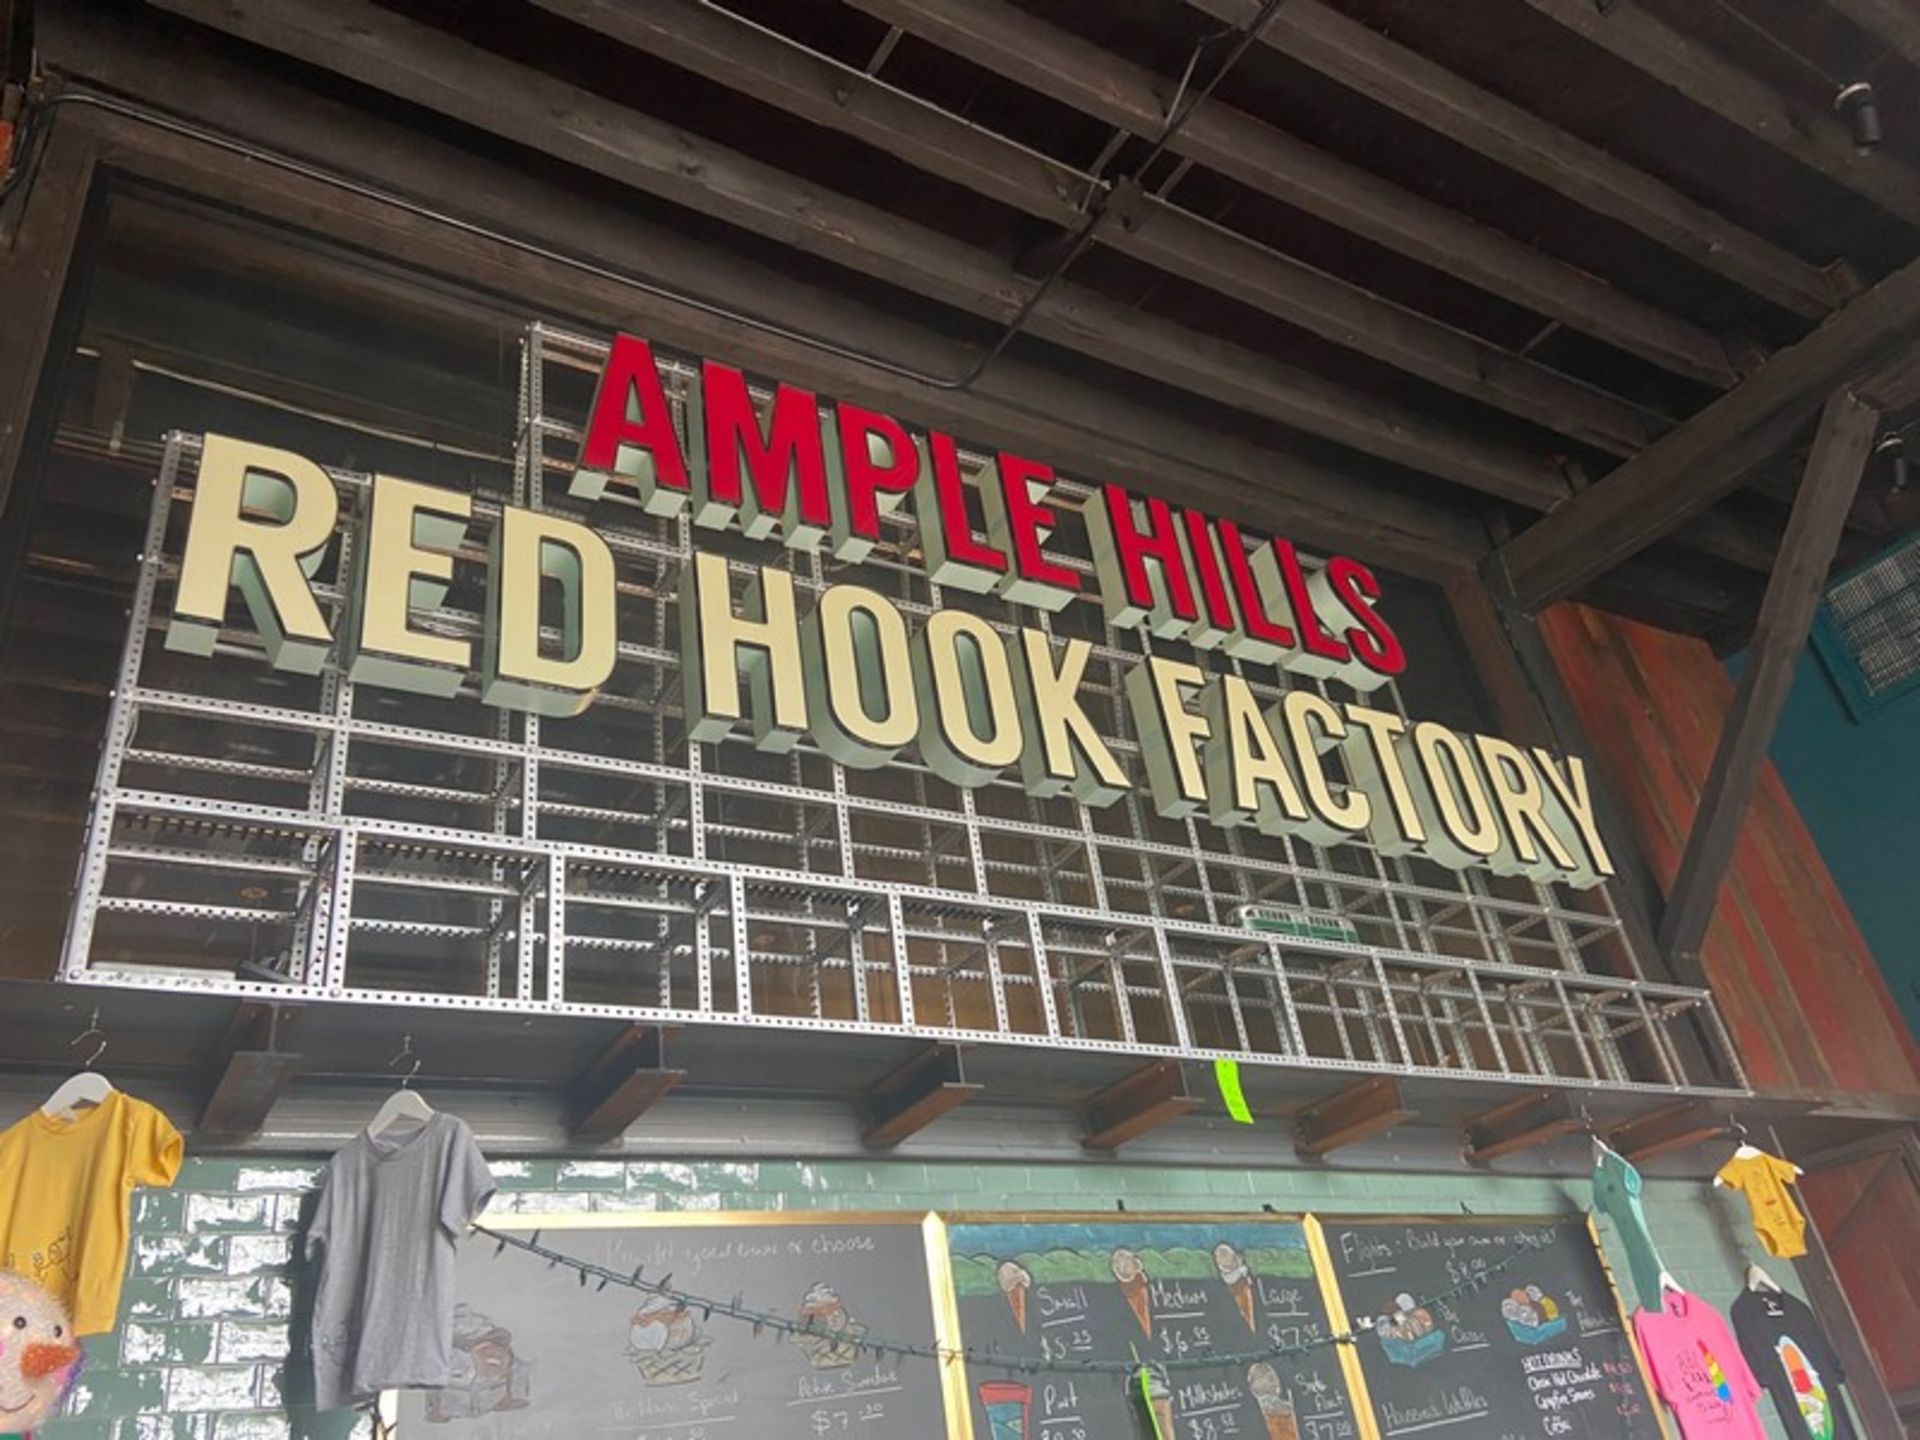 Ample Hills Red Hook Factory In-Store Sign (LOCATED IN RED HOOK BROOKLYN, N.Y.) - Image 2 of 2